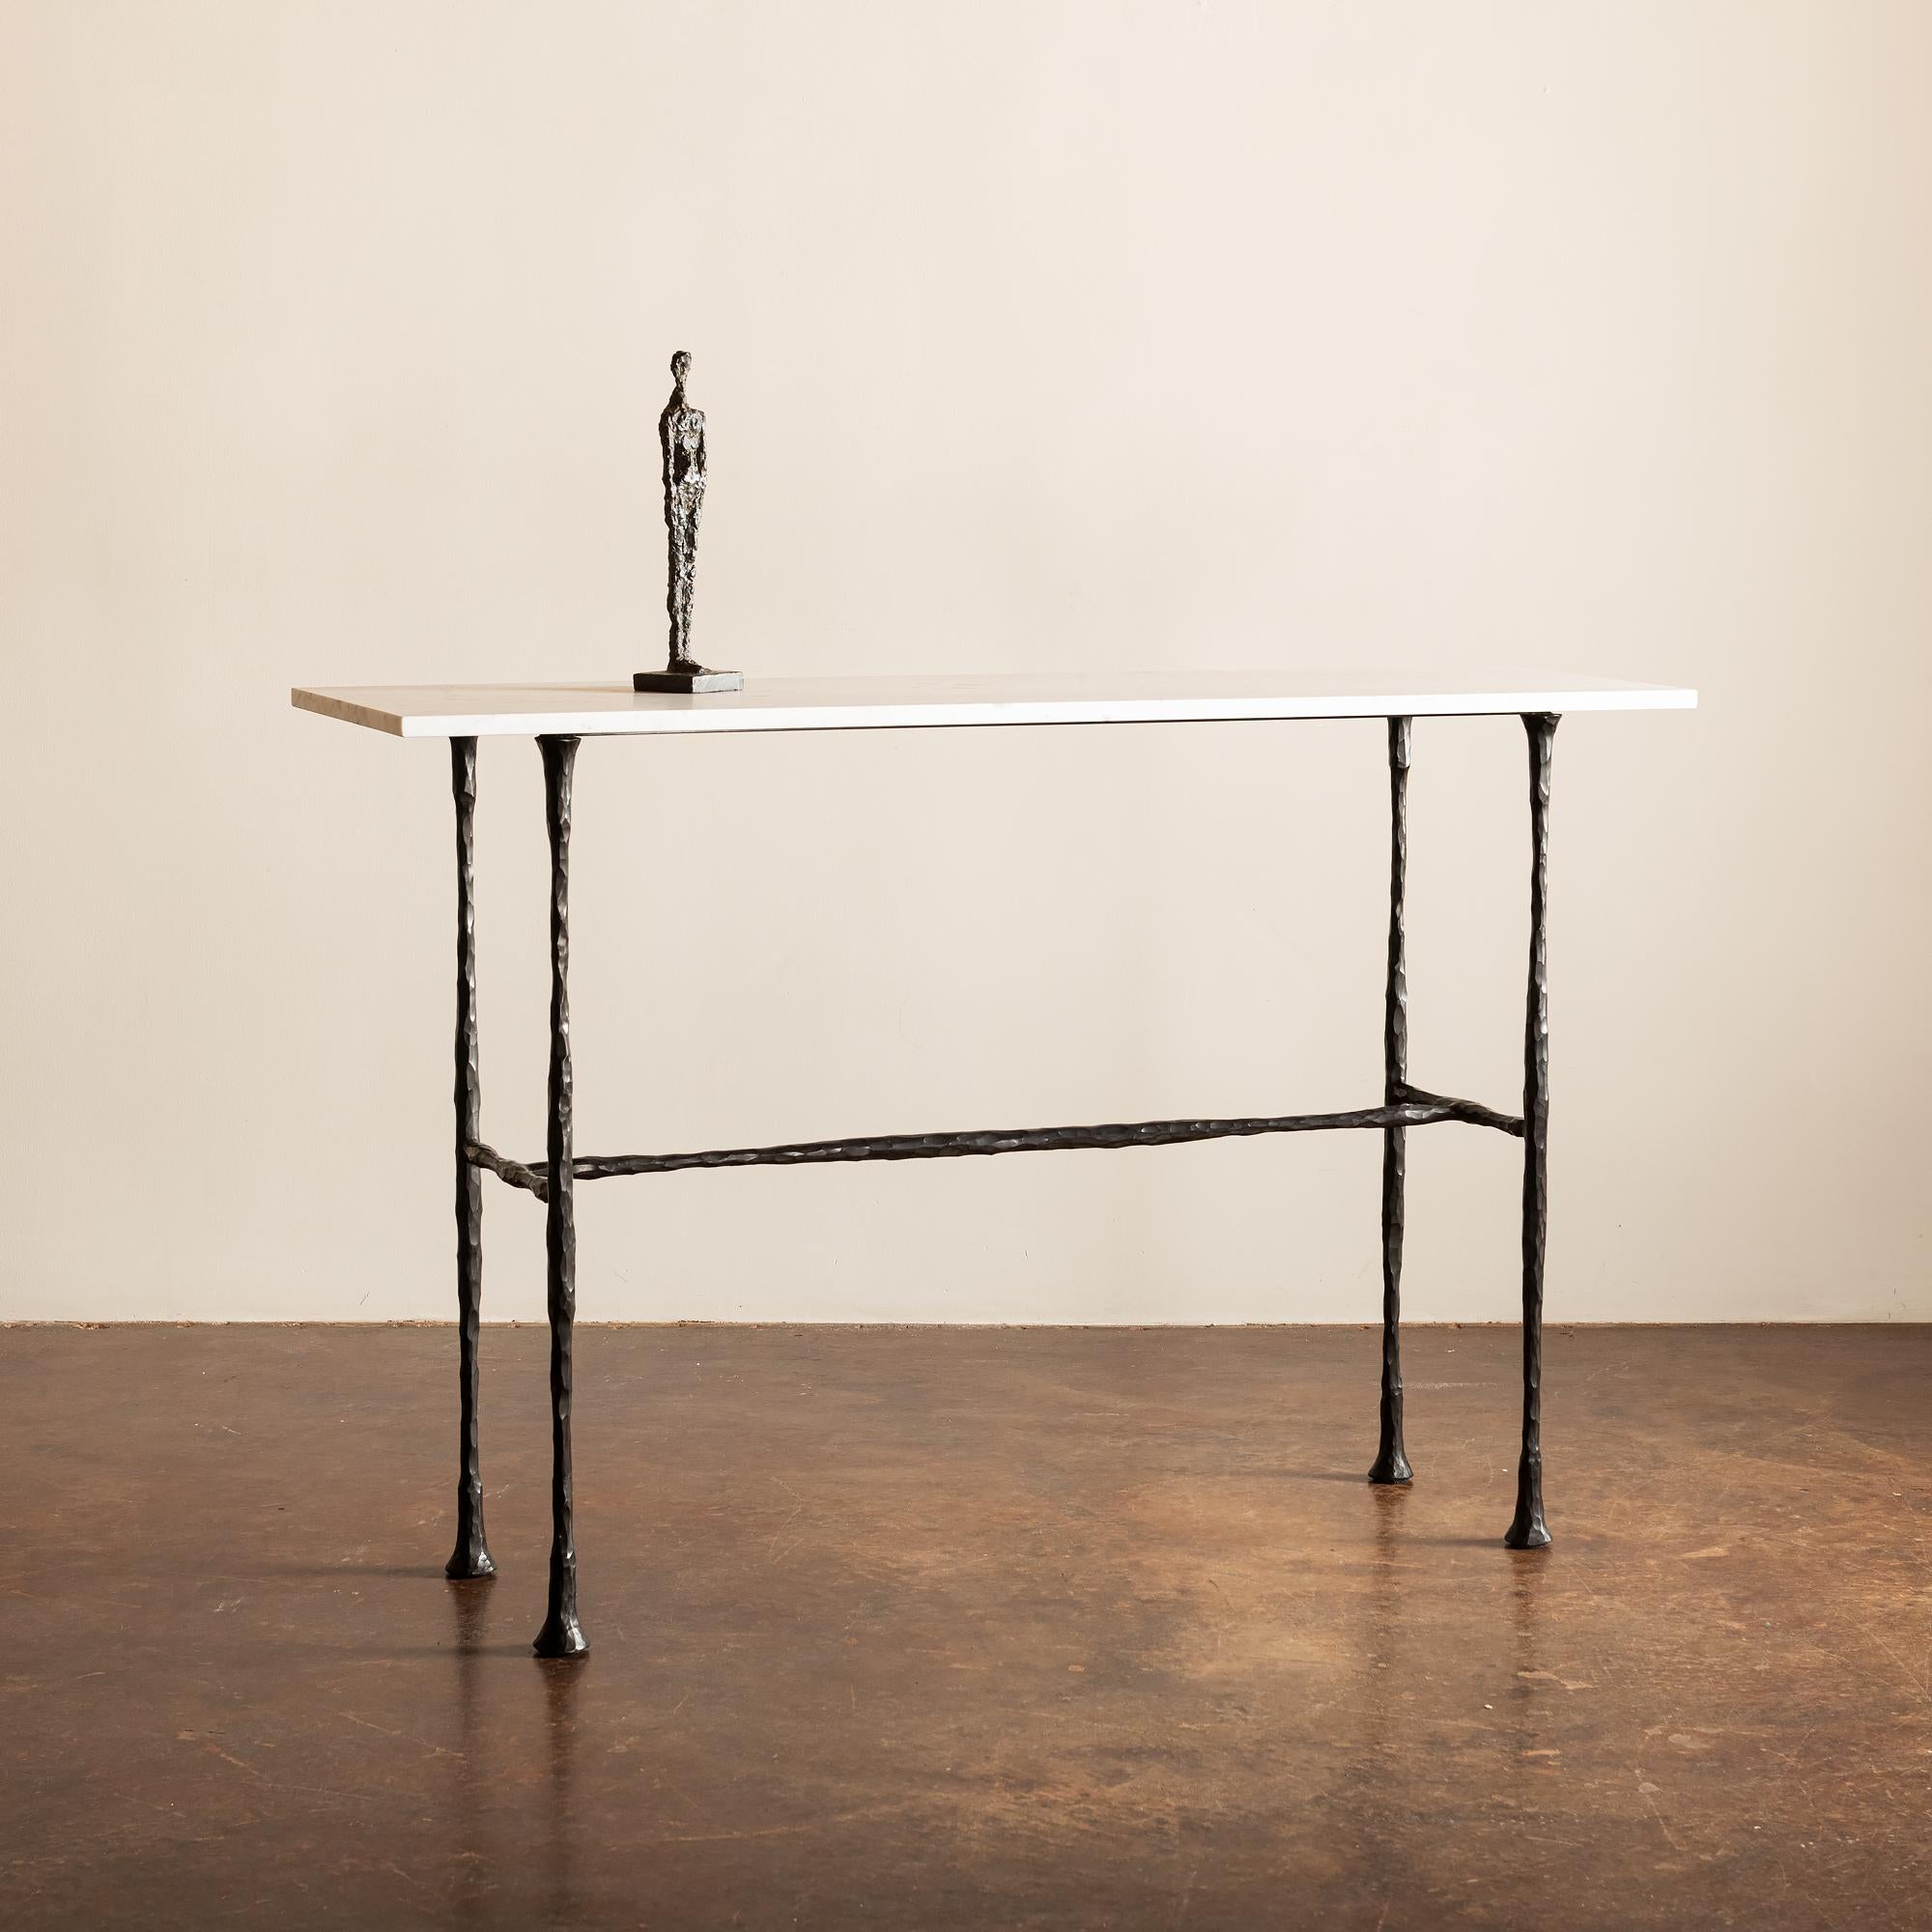 The DA Console table is inspired by the work of Diego and Alberto Giacometti and is executed in blackened bronze and Carrara marble. This piece is a collaboration between Lauren Hunt and Caleb Kullman, a talented blacksmith who works in Santa Fe,